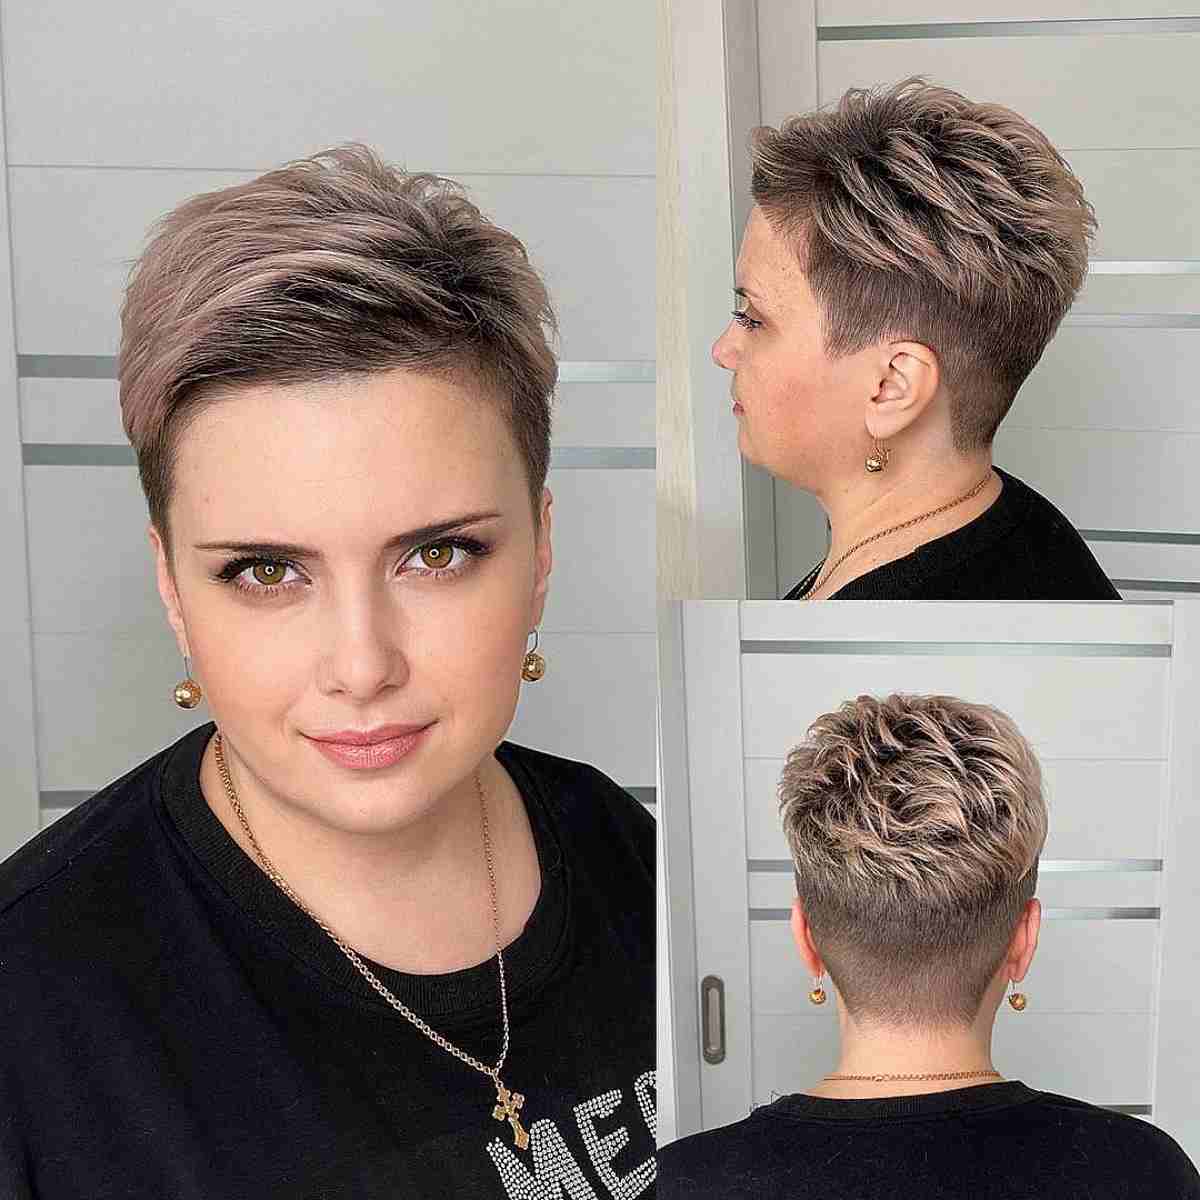 18 Flattering Short Haircut Ideas for Full Faces to Look Thinner